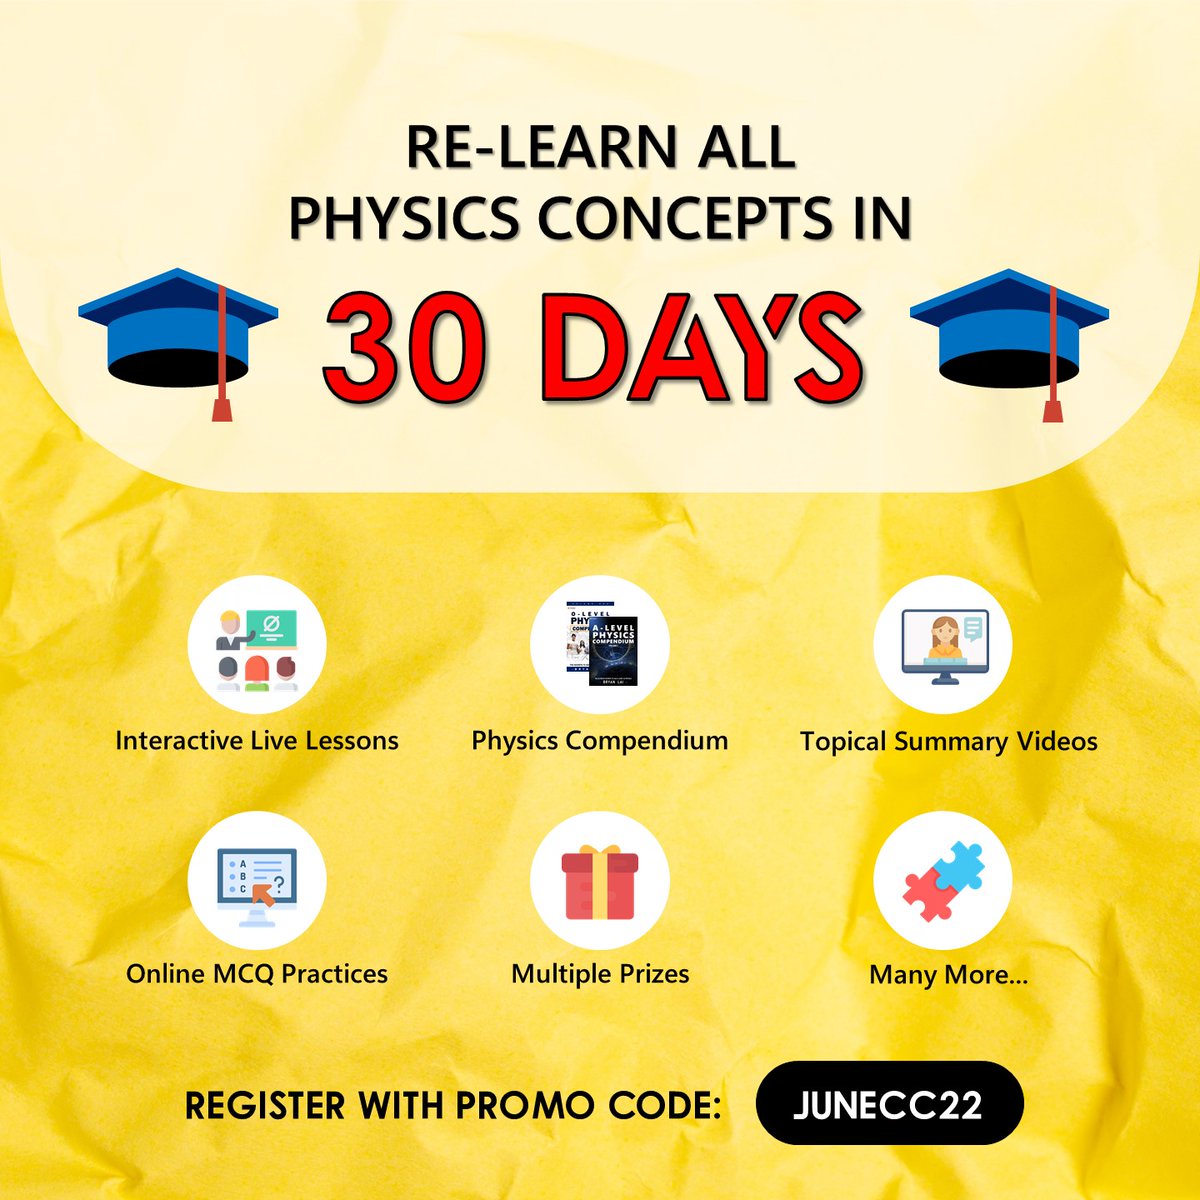 June Holiday is approaching and if you are taking Physics, this is a golden chance for you to transform your results via our popular 𝟑𝟎-𝐃𝐚𝐲 𝐉𝐮𝐧𝐞 𝐂𝐫𝐚𝐬𝐡 𝐂𝐨𝐮𝐫𝐬𝐞 𝐂𝐡𝐚𝐥𝐥𝐞𝐧𝐠𝐞!
Visit physicsacademy.sg to view for more info
#juneholiday #crashcourse